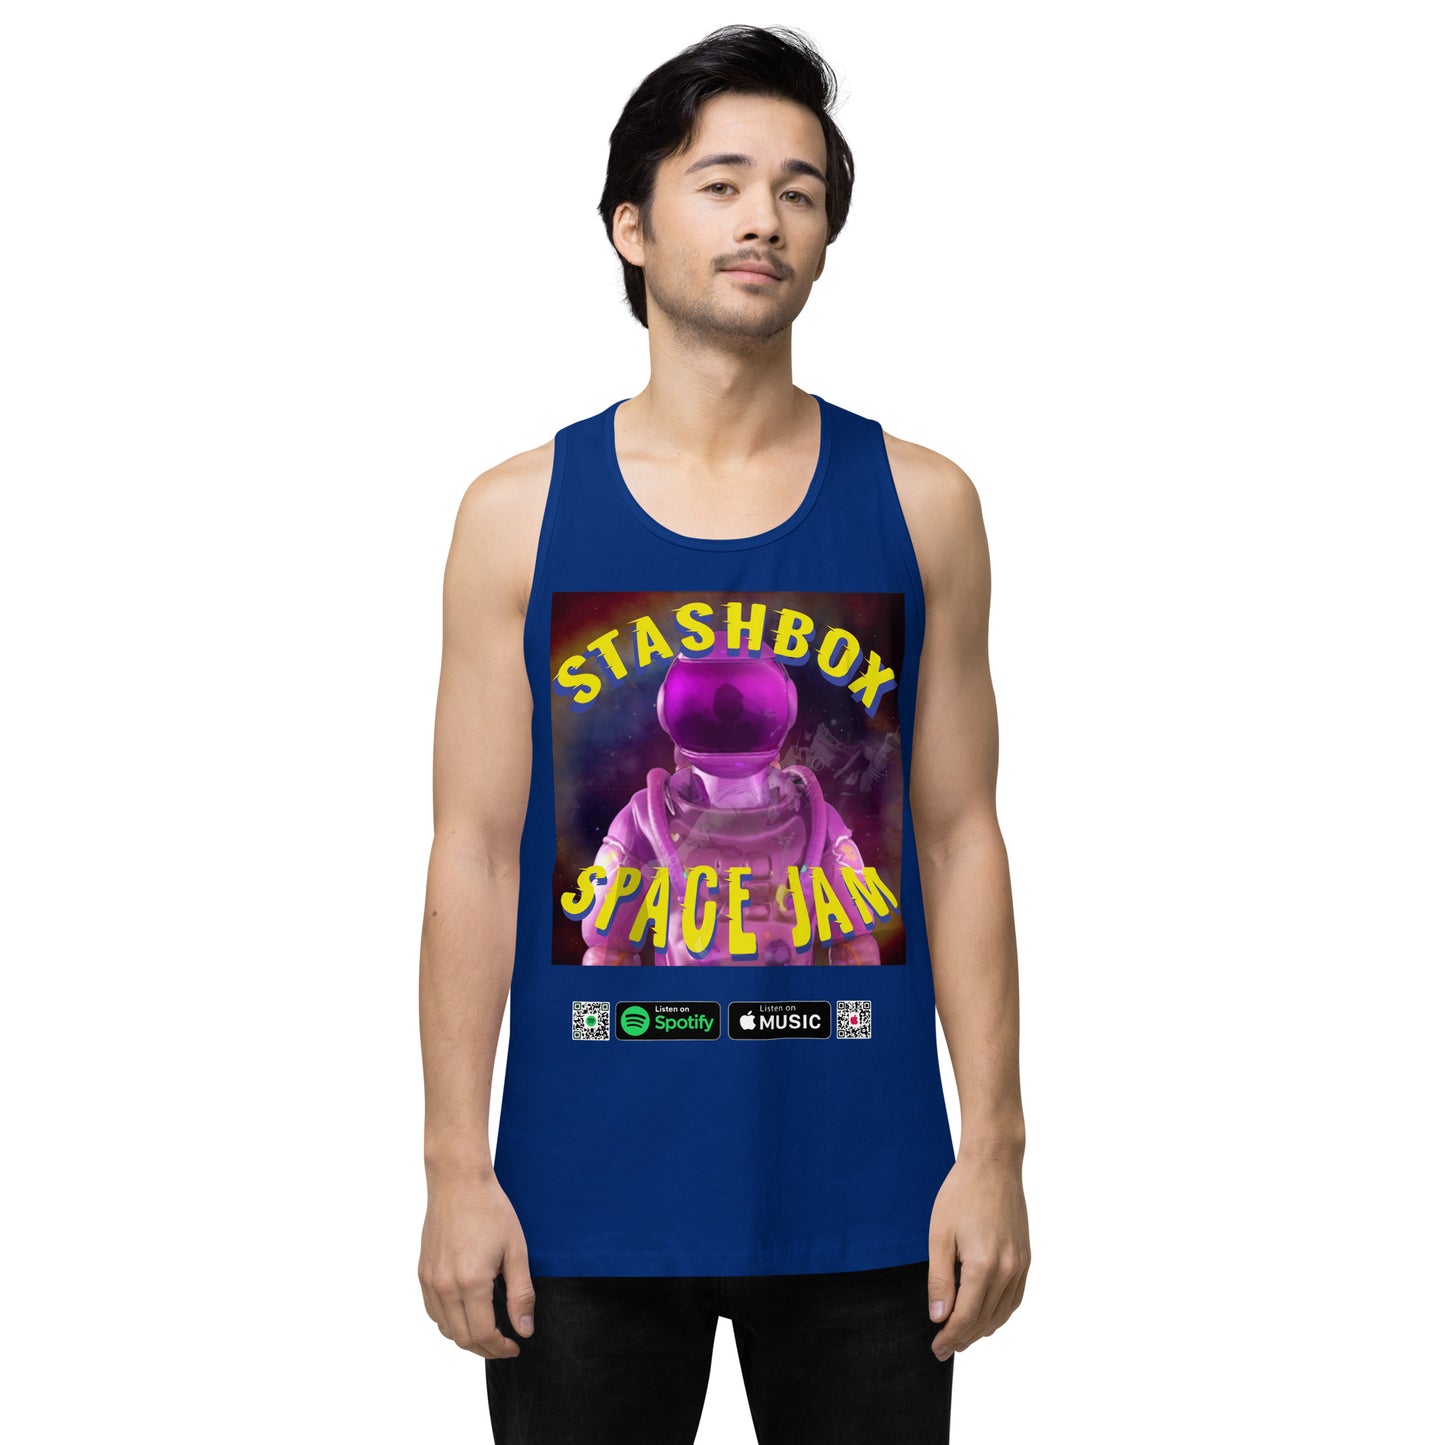 Stellar Wardrobe Addition: Space Jam - Stashbox Men’s Premium Tank Top, Design #005. Elevate your style with this cosmic tank top. Its captivating design blends art and astronomy, making it ideal for stargazers and fashion-forward individuals. #StashboxSpaceFashion #CelestialChic #GalacticComfort